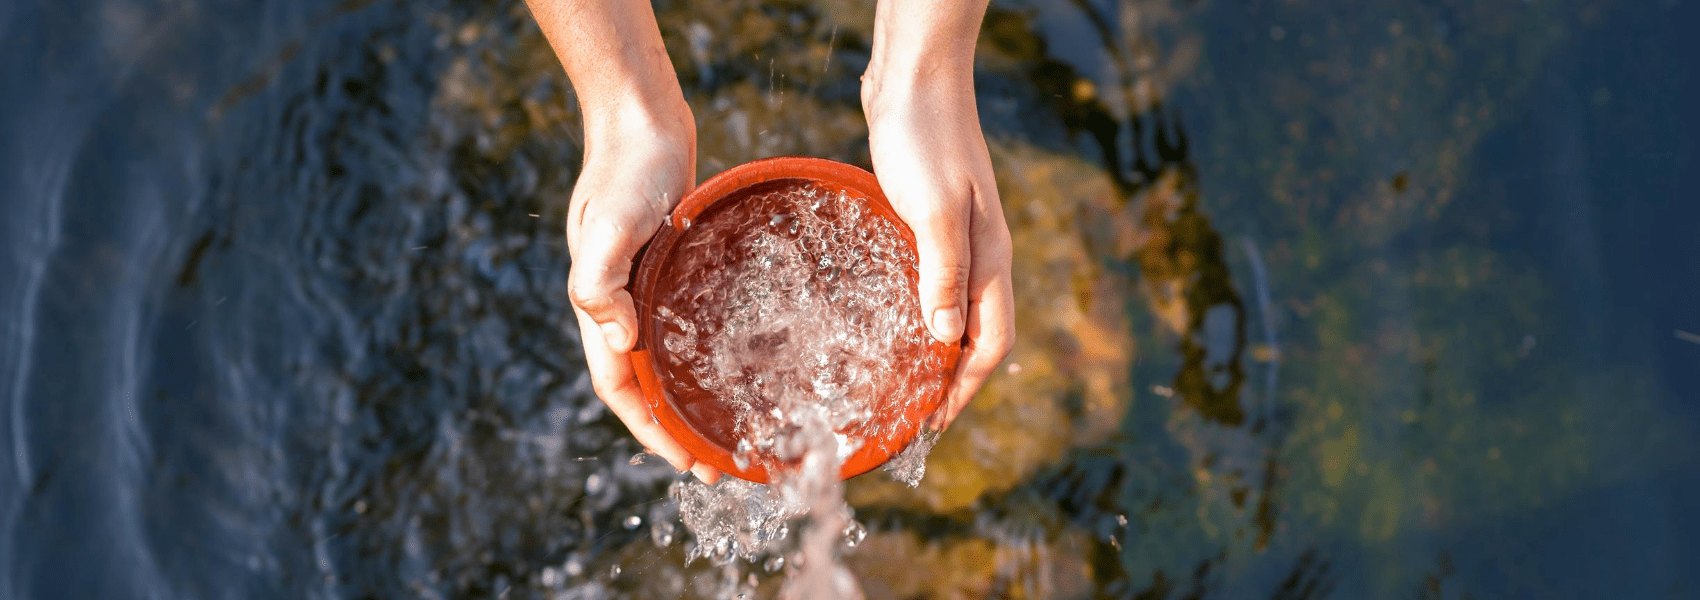 What Does Water Have to Teach Us About Unity In Diversity?